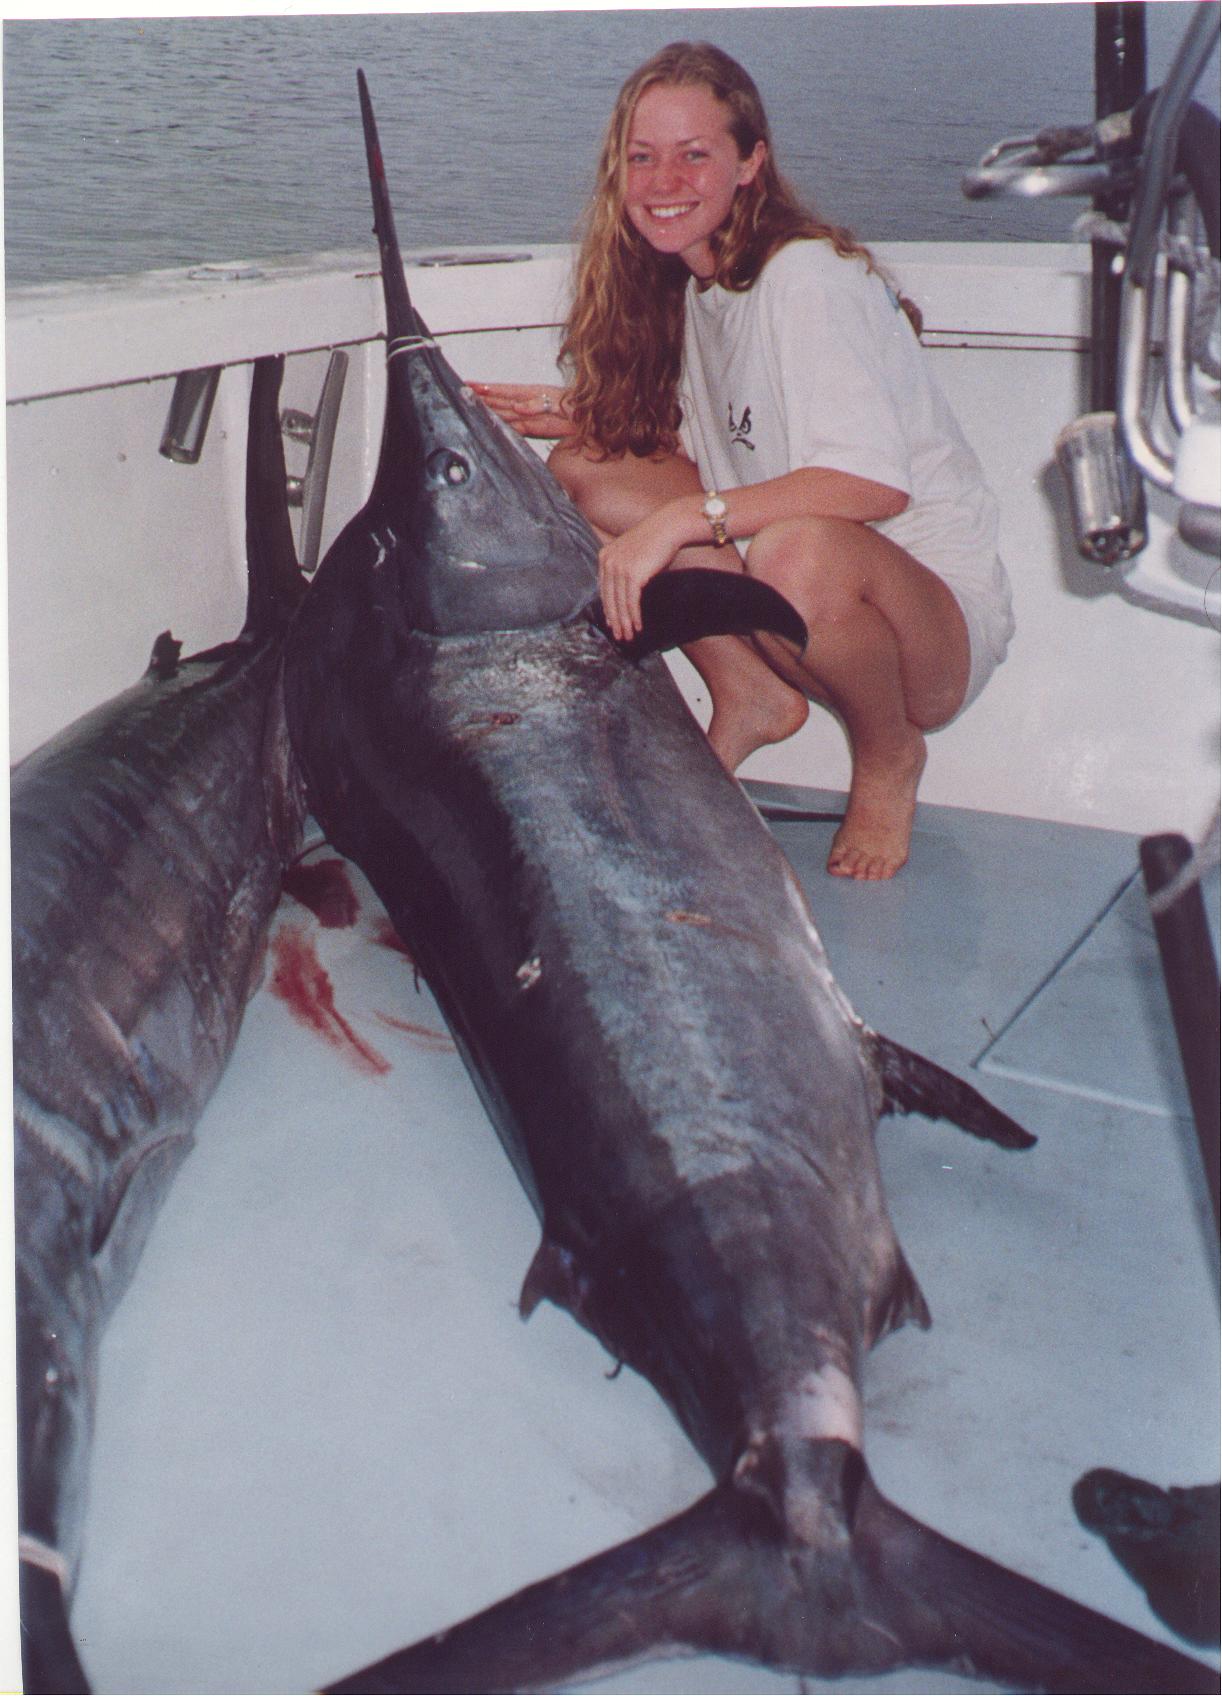 Two more Marlin onboard